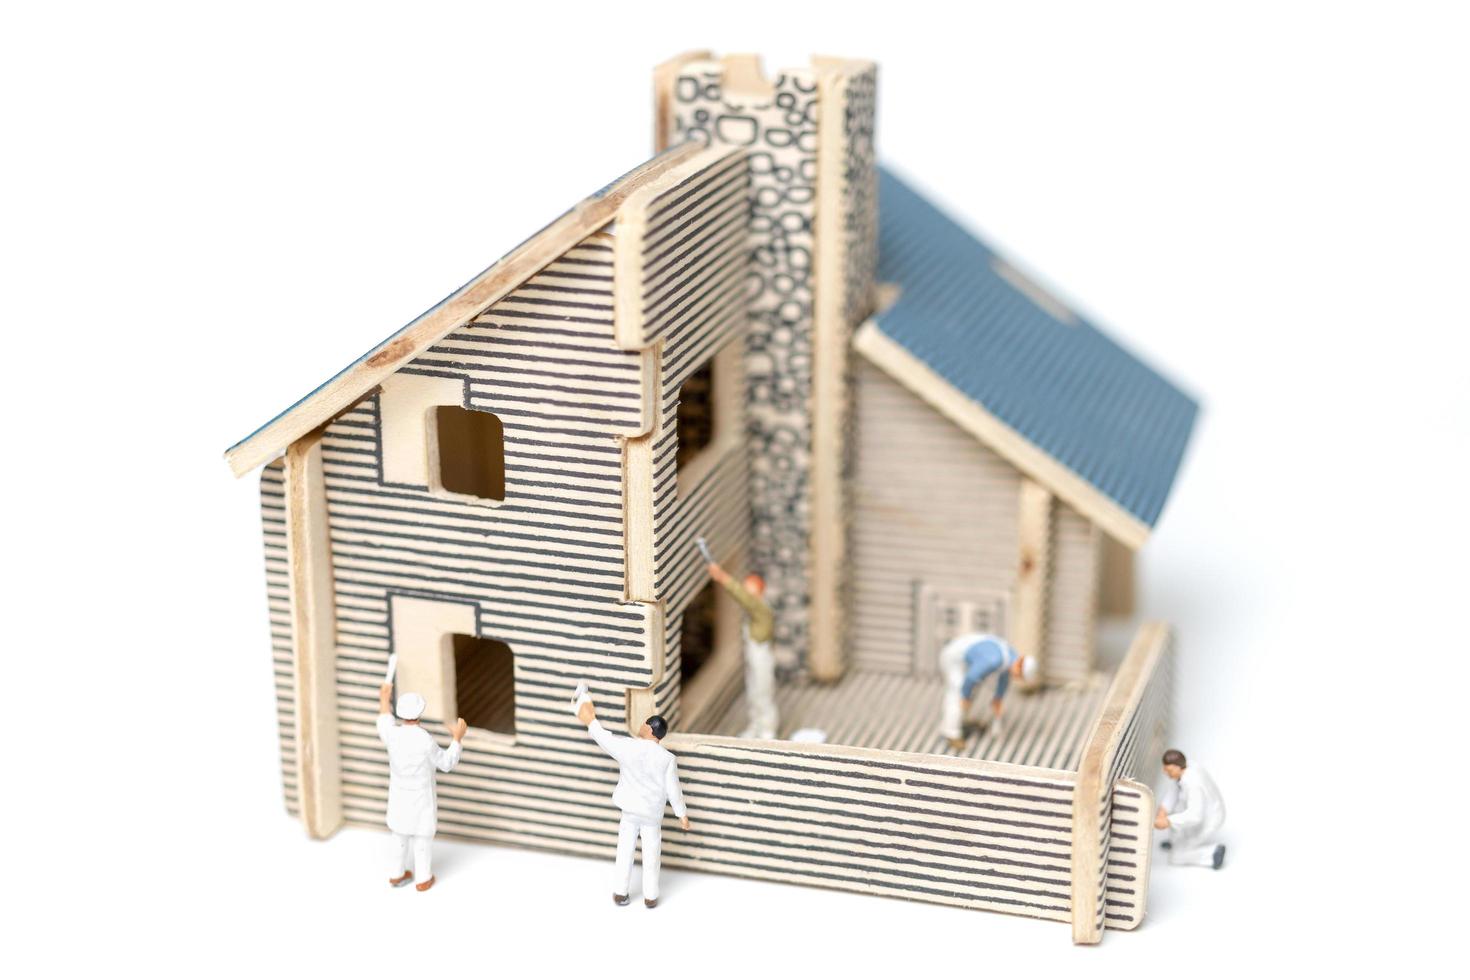 Miniature painters painting a wooden house on a white background photo